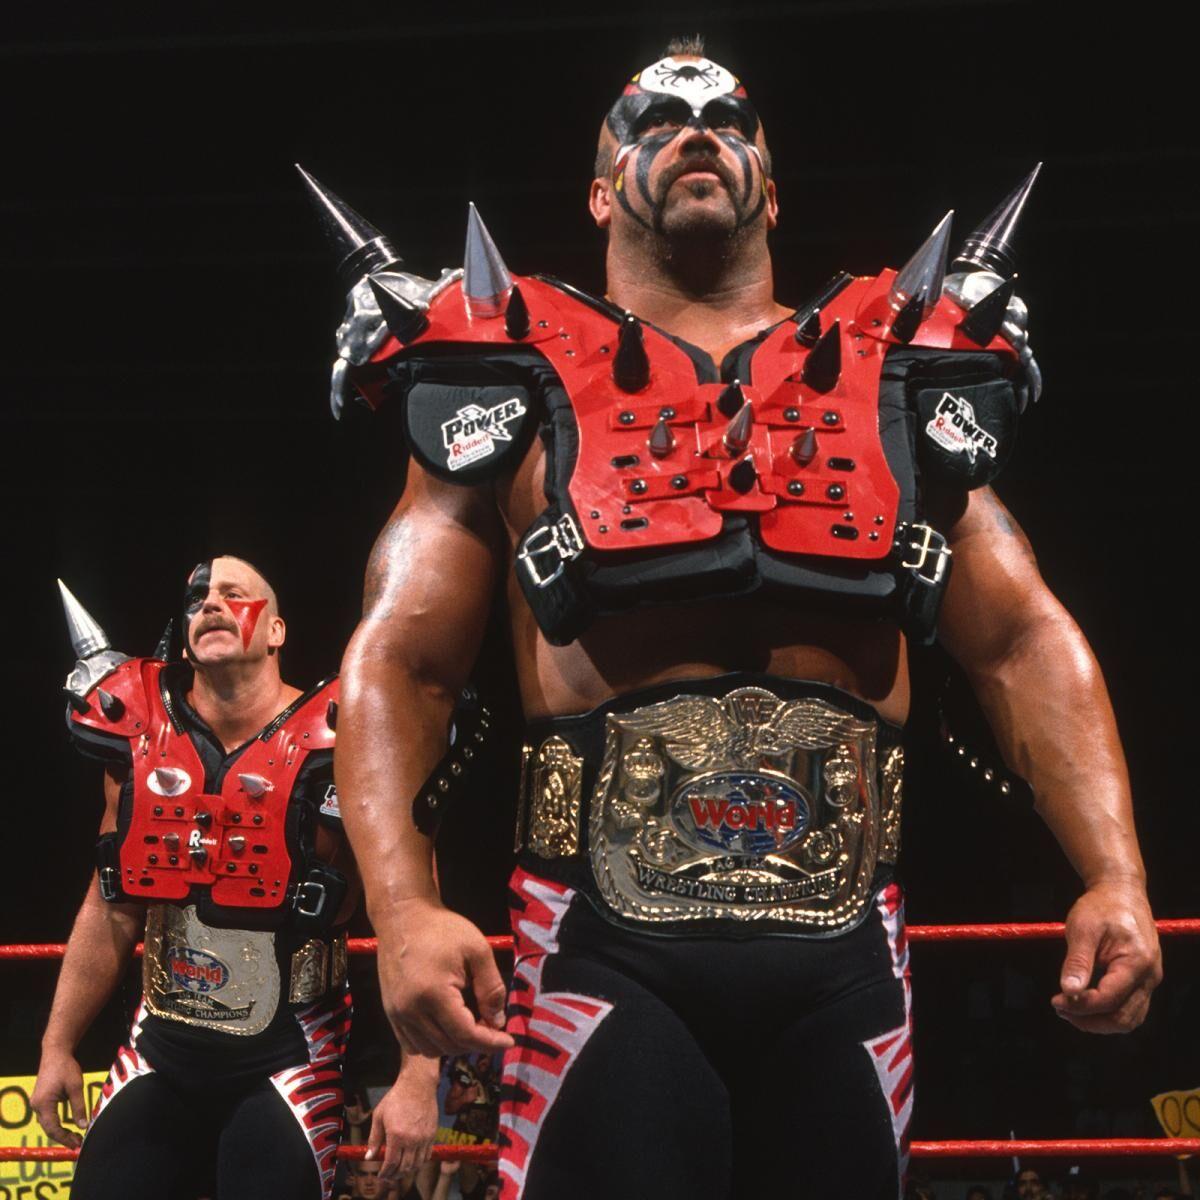 Oh, what a rush!' Remembering 'Road Warrior Animal' Joe Laurinaitis |  Wrestling | postandcourier.com